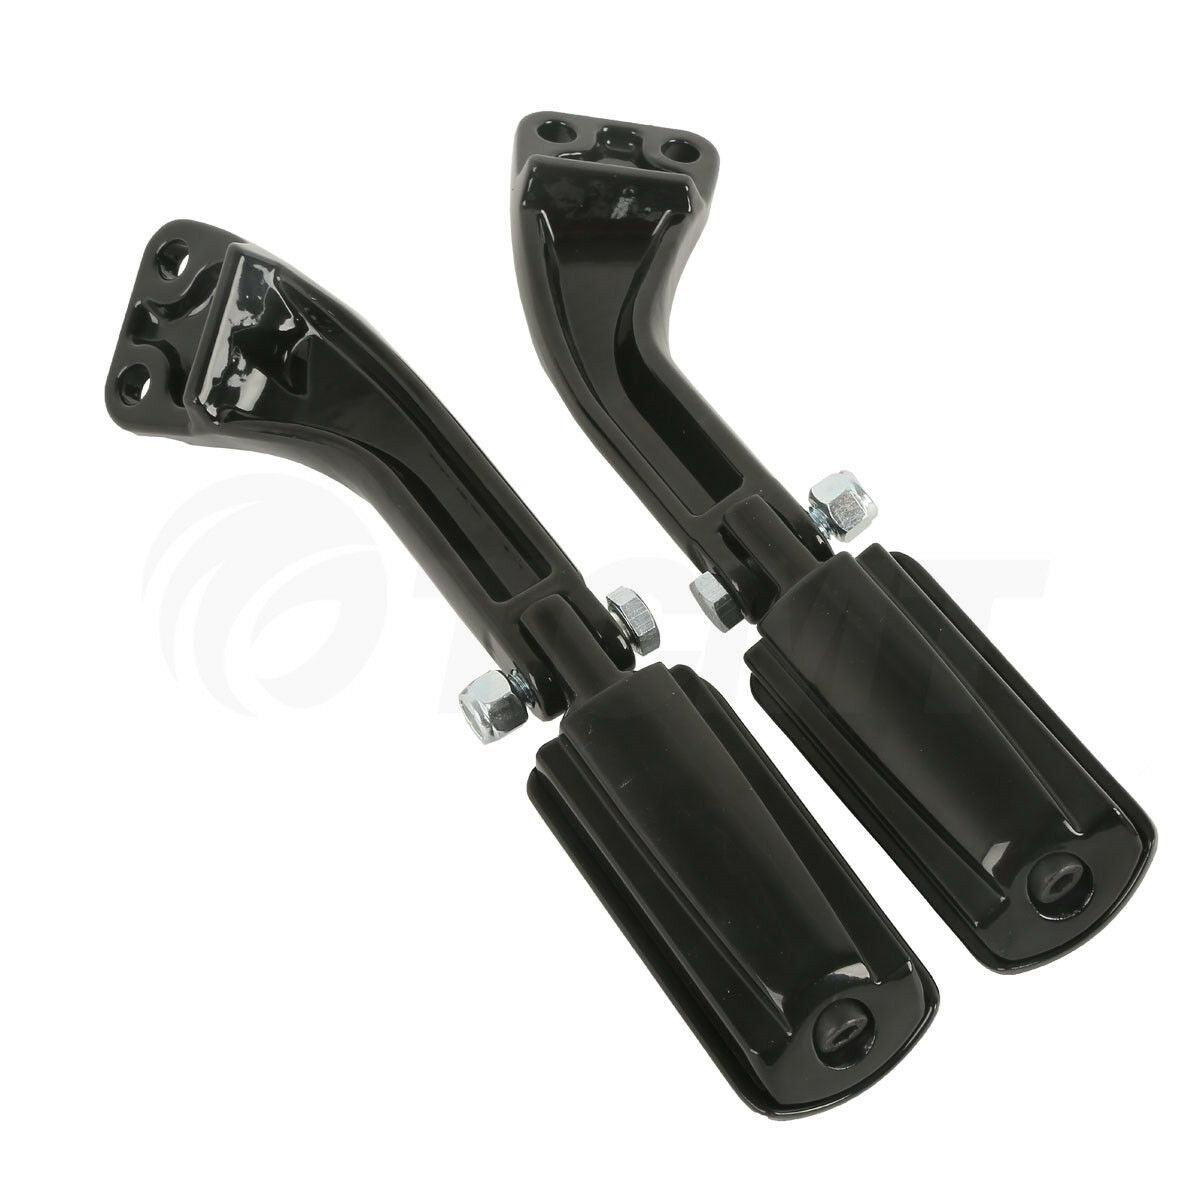 Black Rear Passenger Foot Pegs/Support Mount Fit For Harley Dyna Fat Bob 08-16 - Moto Life Products